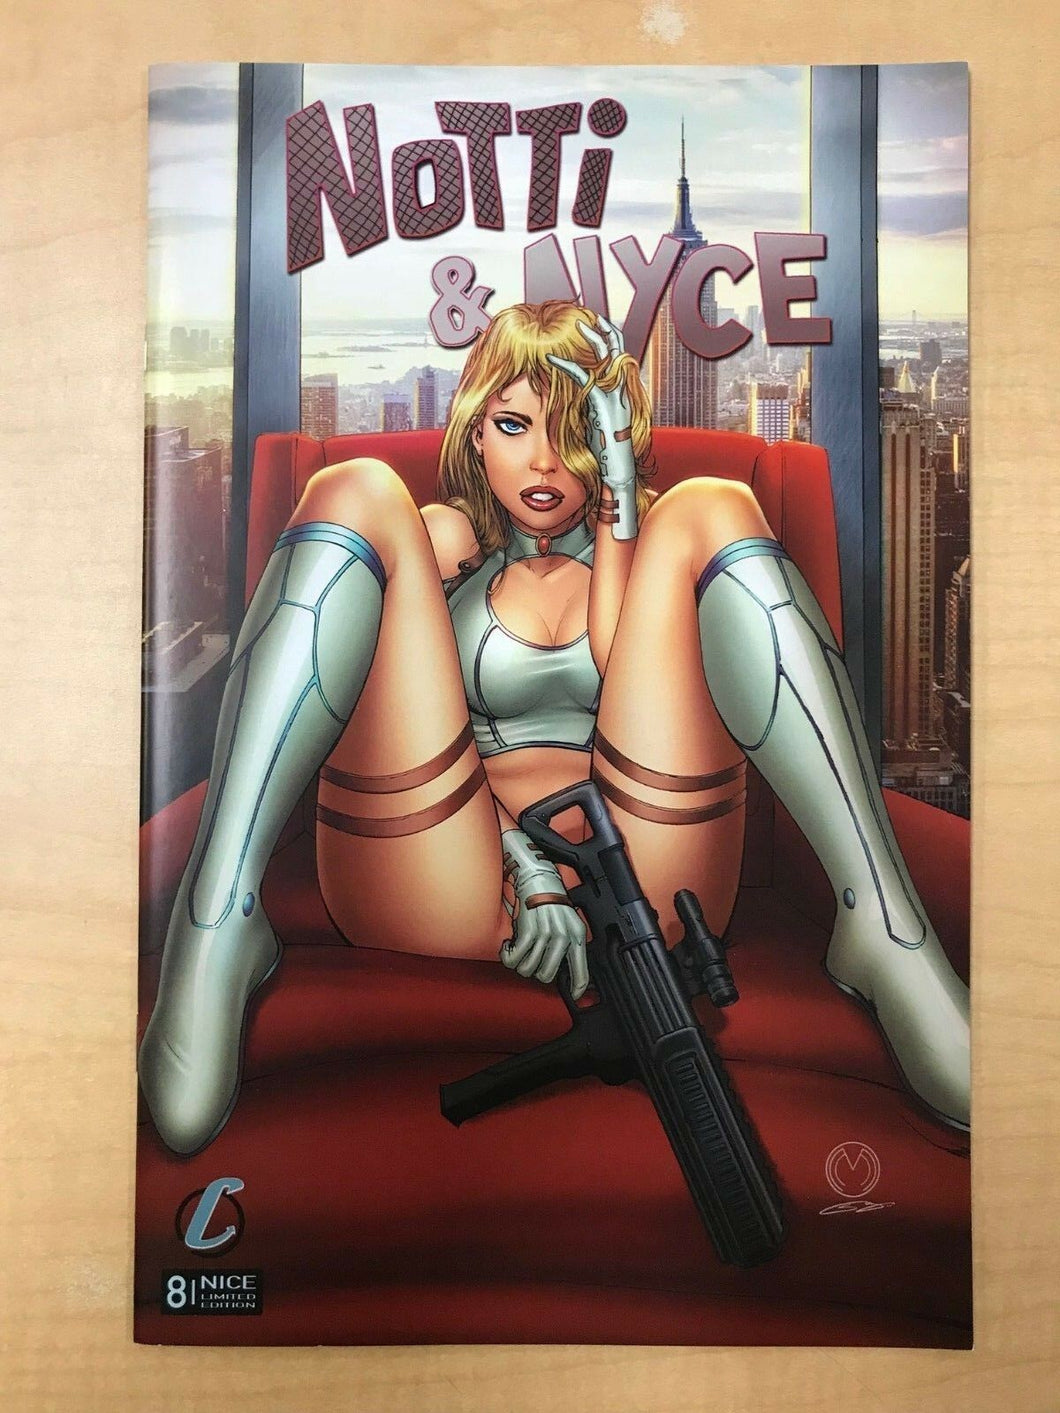 Notti & Nyce #8 Marat Mychaels NAUGHTY Variant Cover Counterpoint